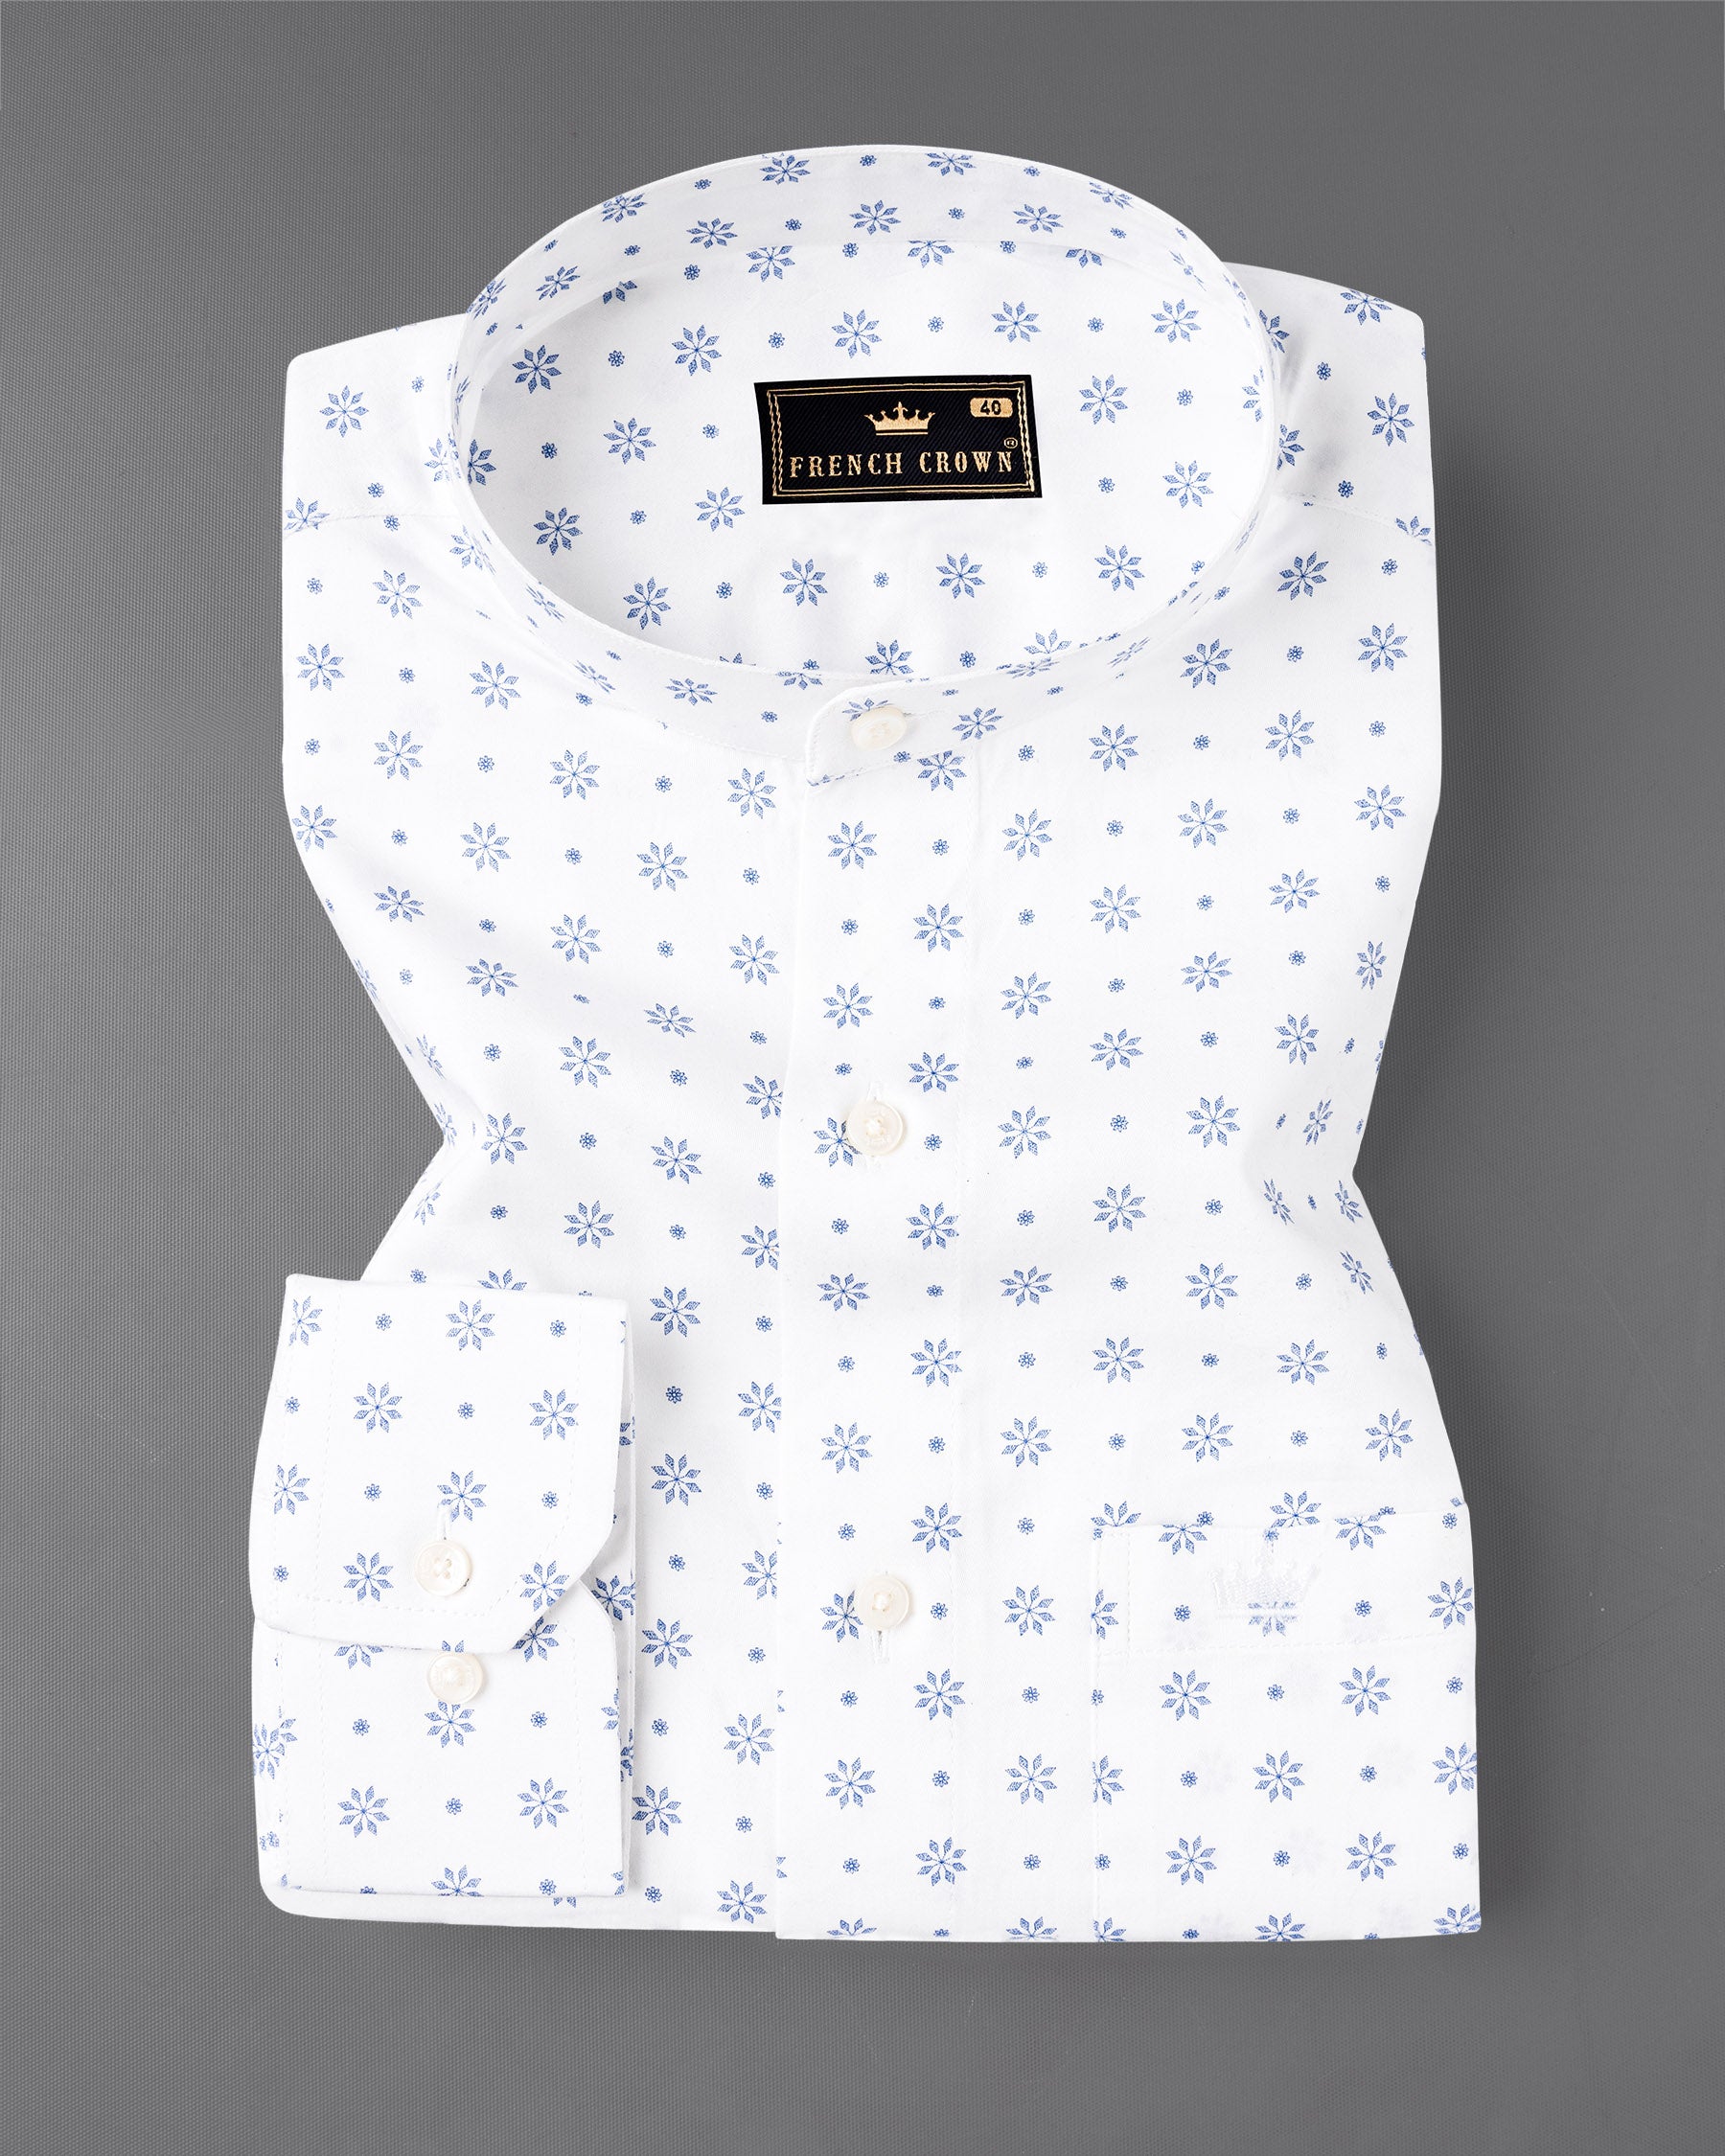 Bright White With Pale Cerulean Blue Floral Printed Premium Satin Shirt